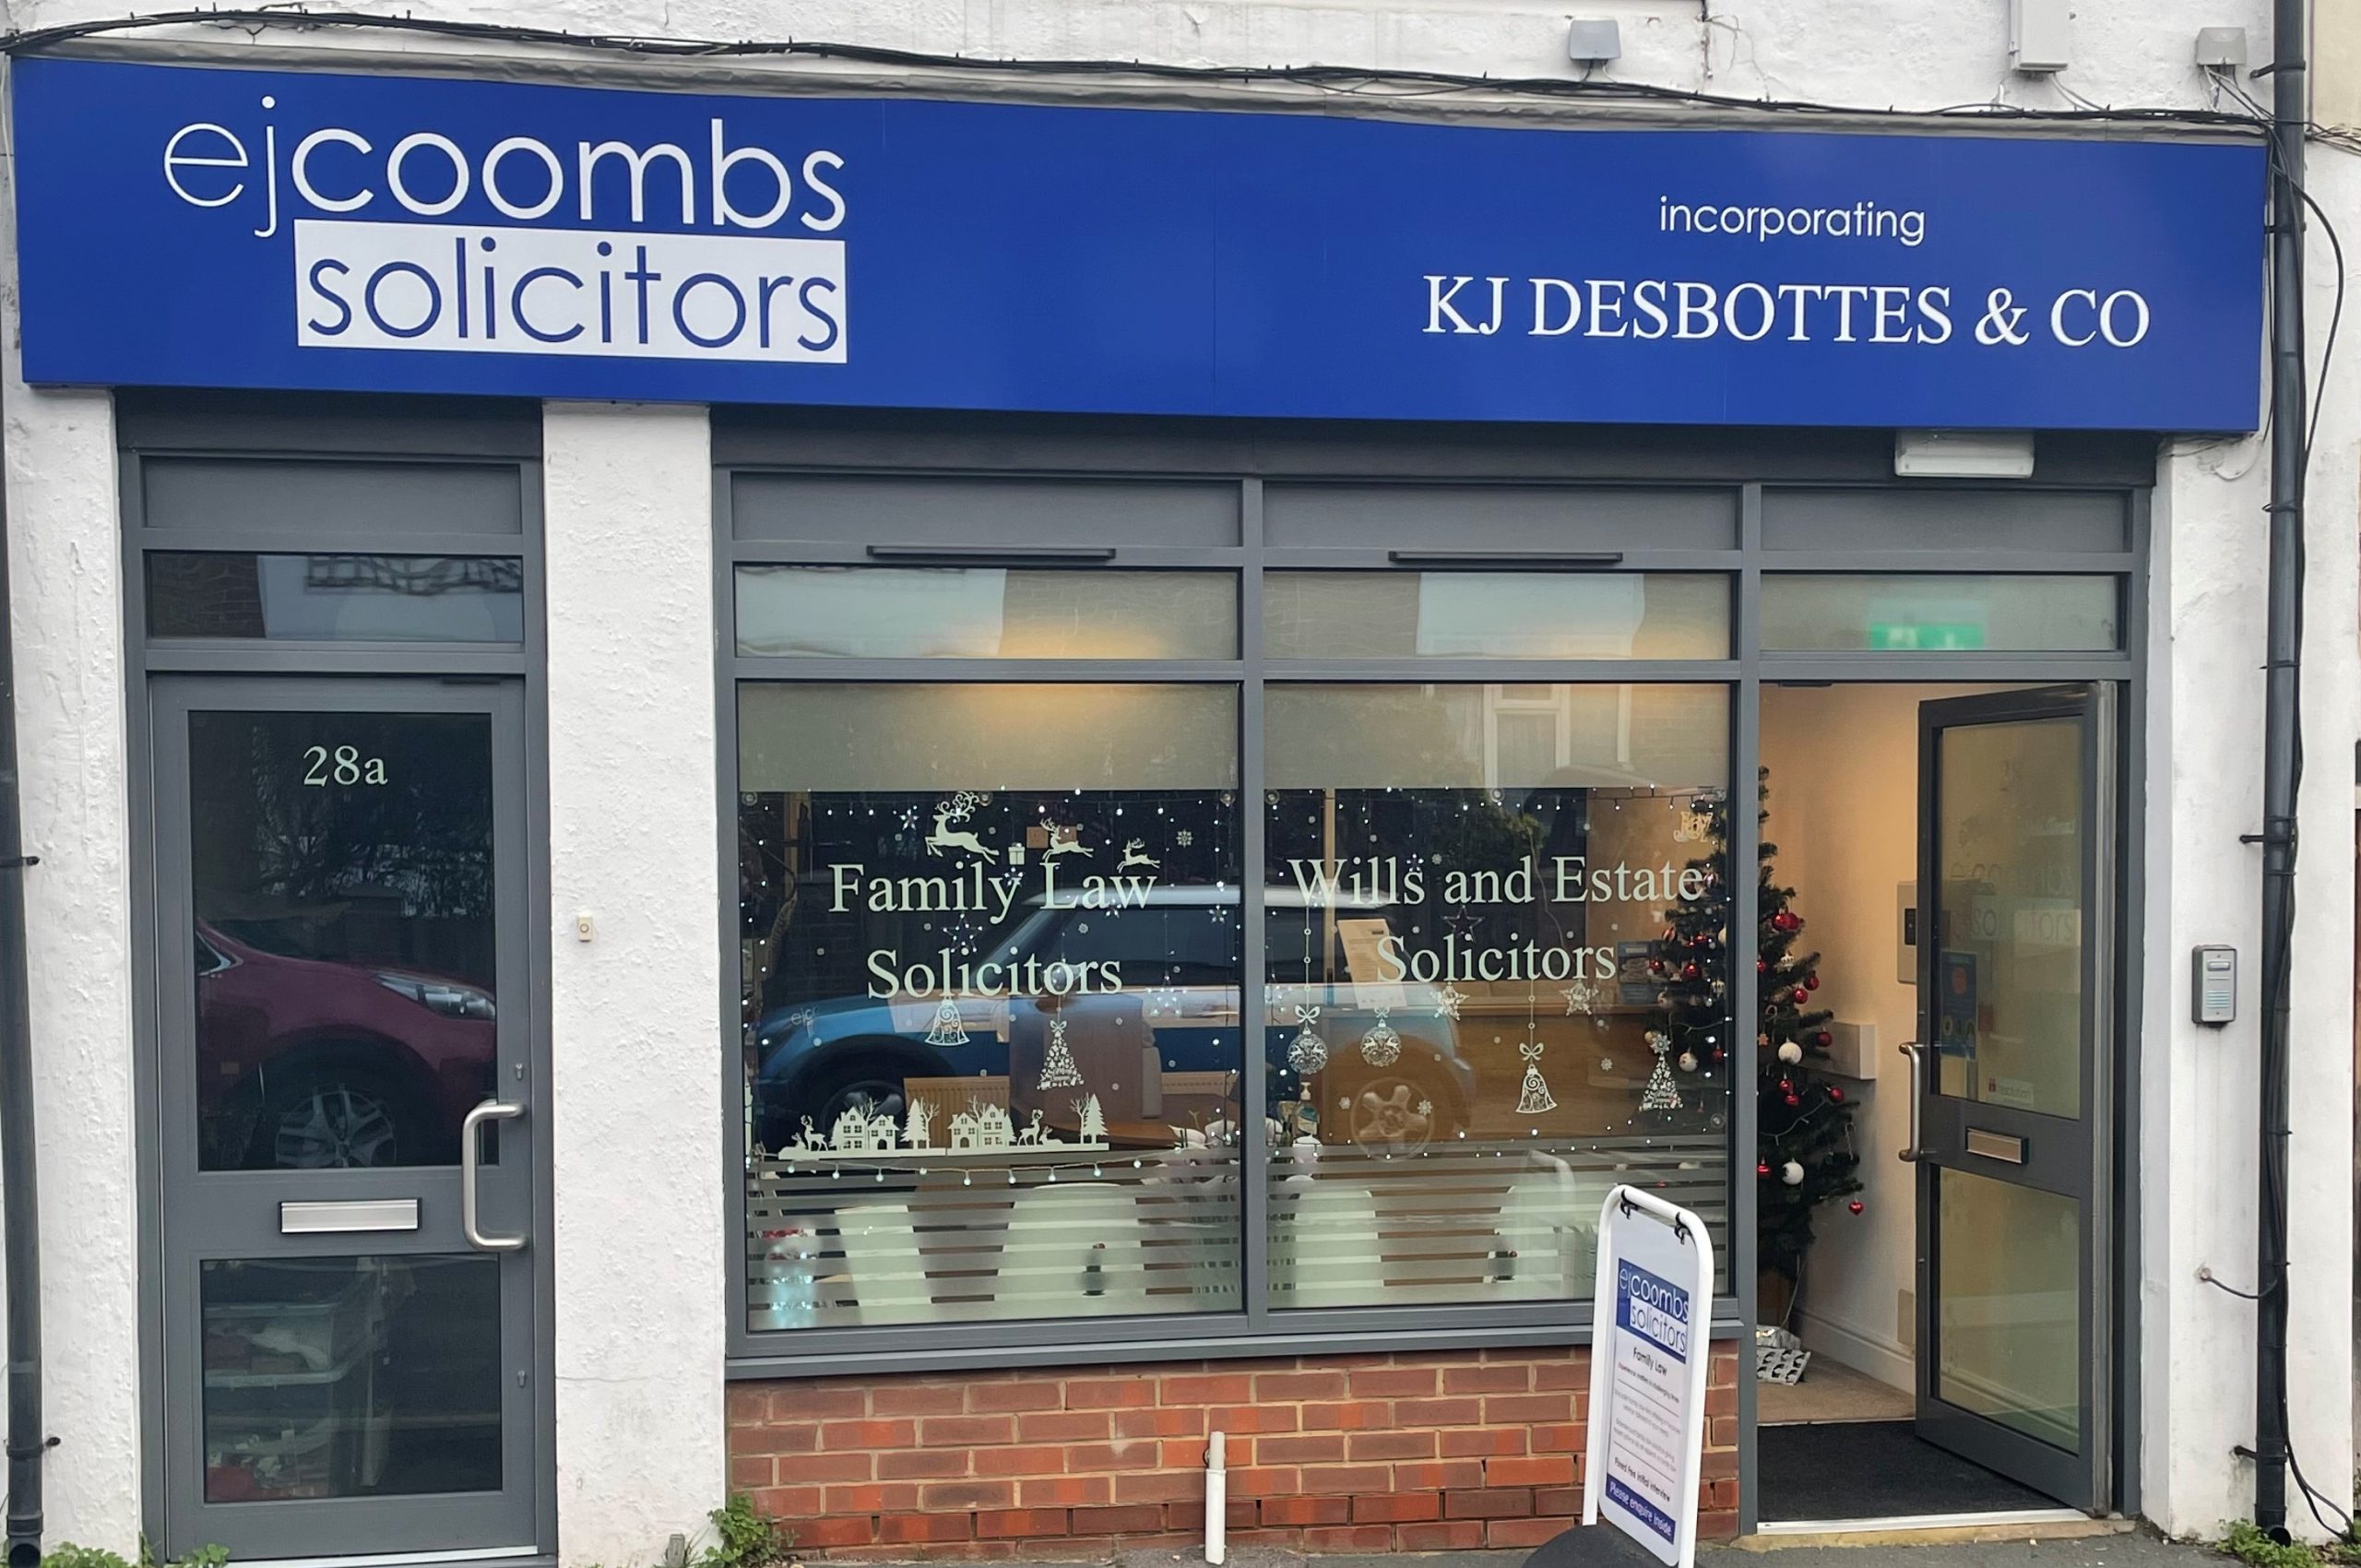 You are currently viewing KJ Desbottes is now branded as E J Coombs Solicitors